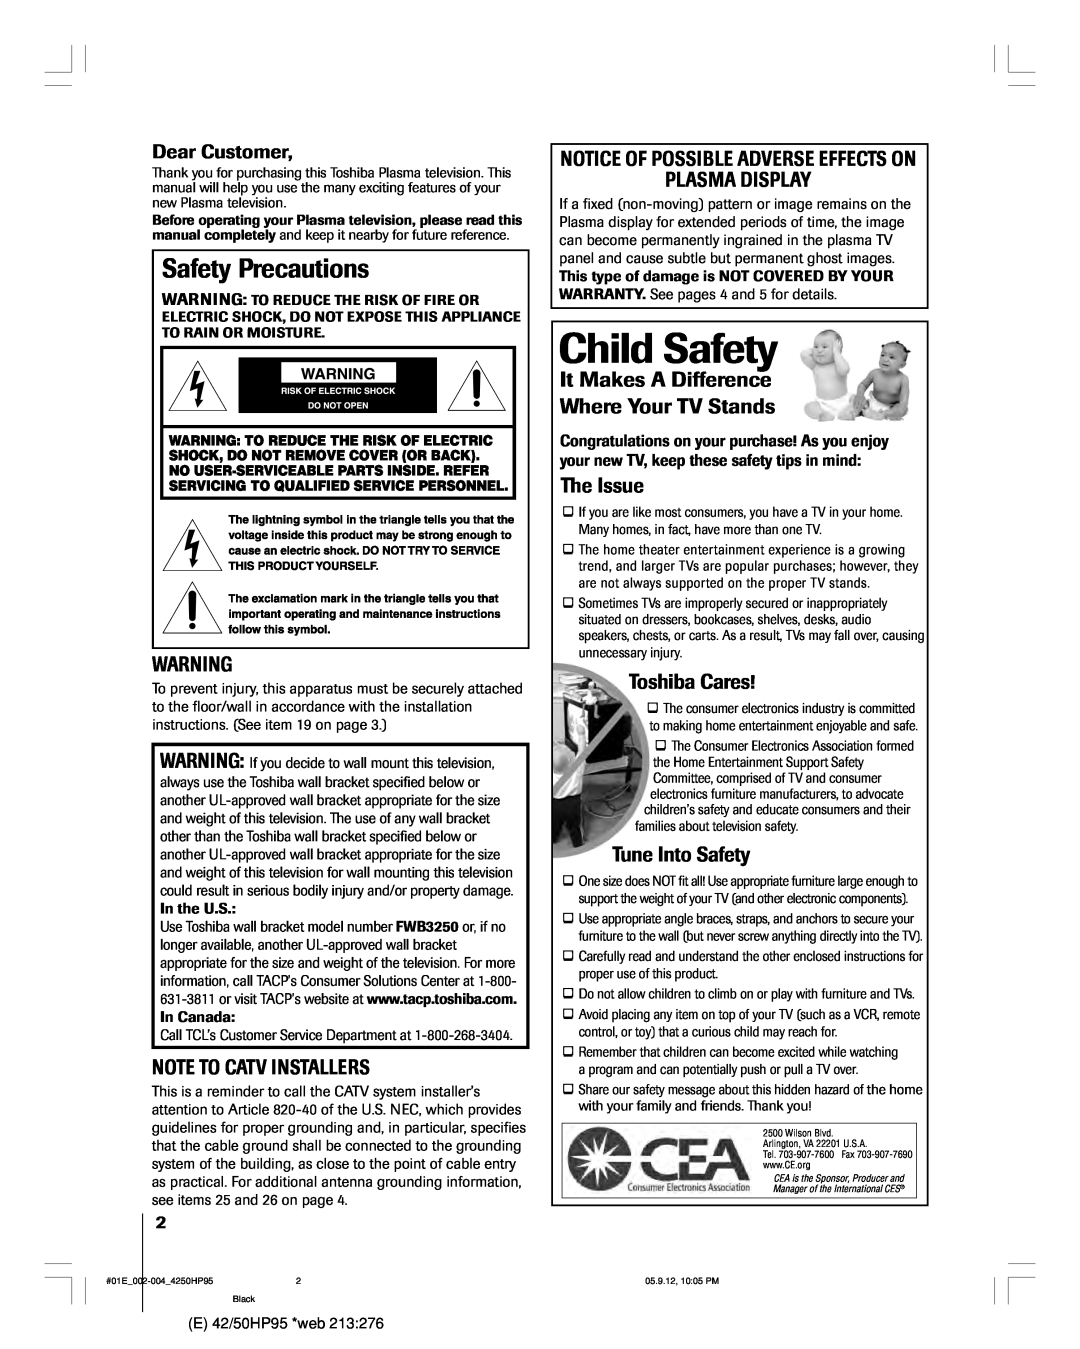 Toshiba 42HP95 Safety Precautions, Note To Catv Installers, Notice Of Possible Adverse Effects On Plasma Display 